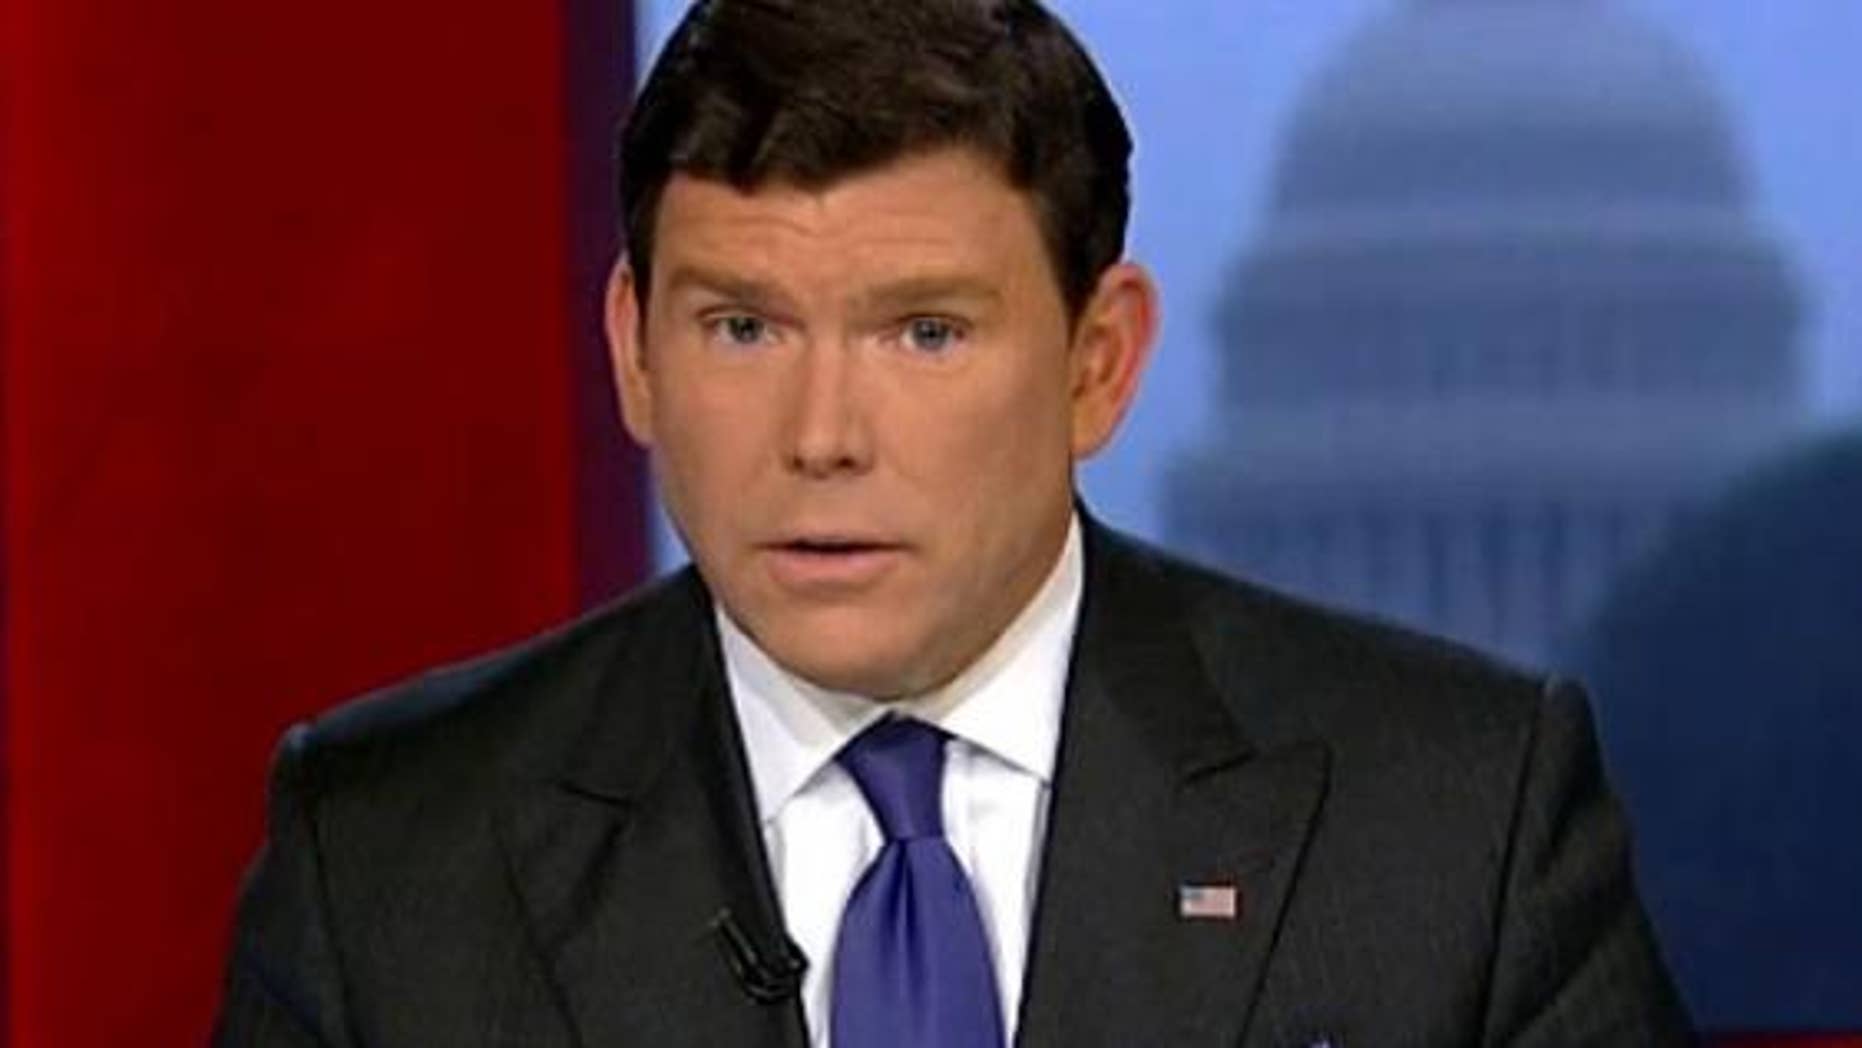 Fox News’ Bret Baier celebrates 10 years anchoring ‘Special Report’